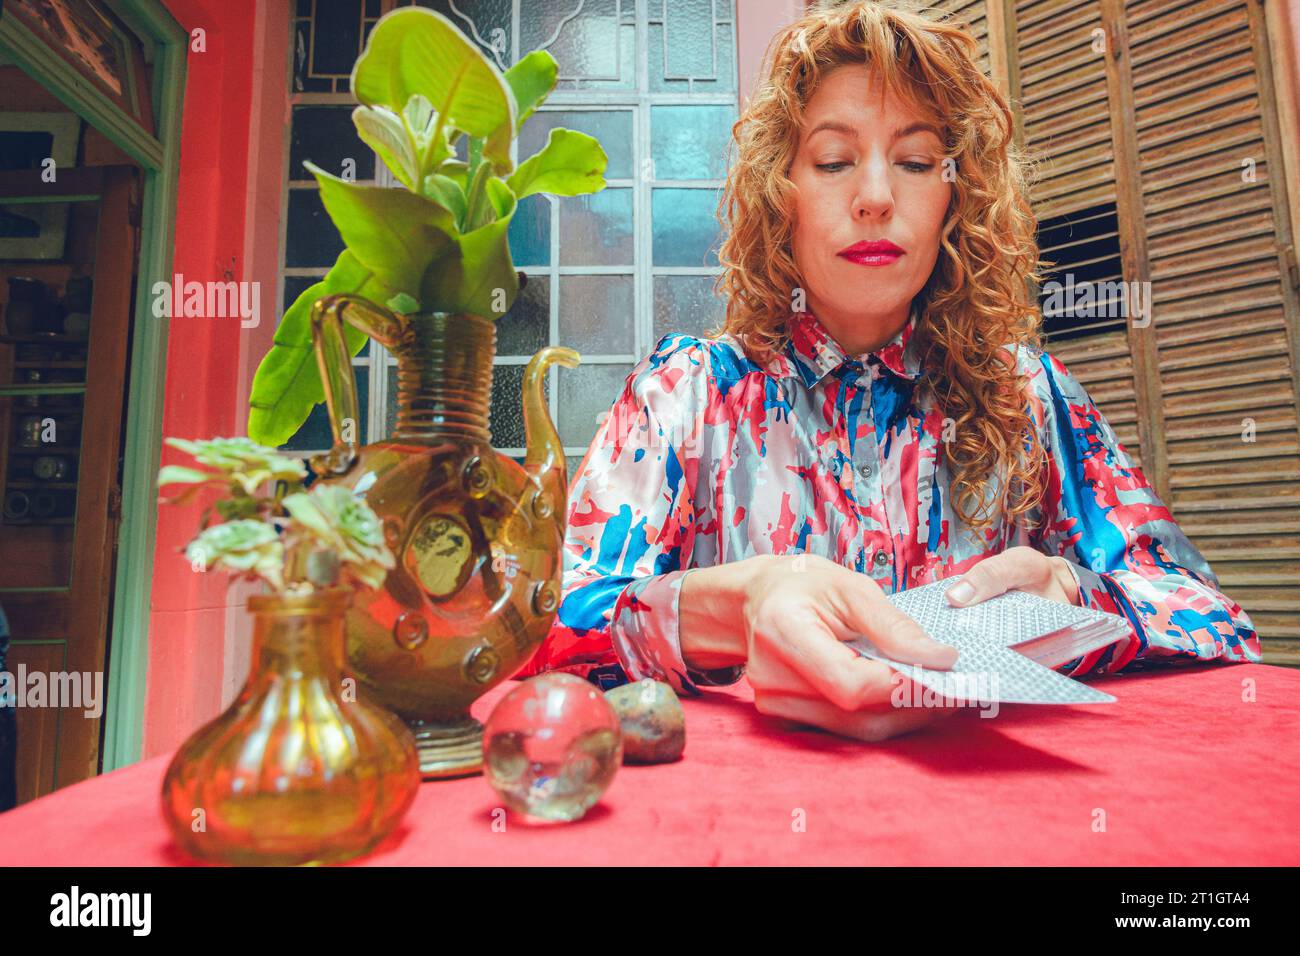 elegant blonde Argentinian adult tarot reader woman with curly hair, sitting at home beginning reading taking card out of deck to place it on table, c Stock Photo